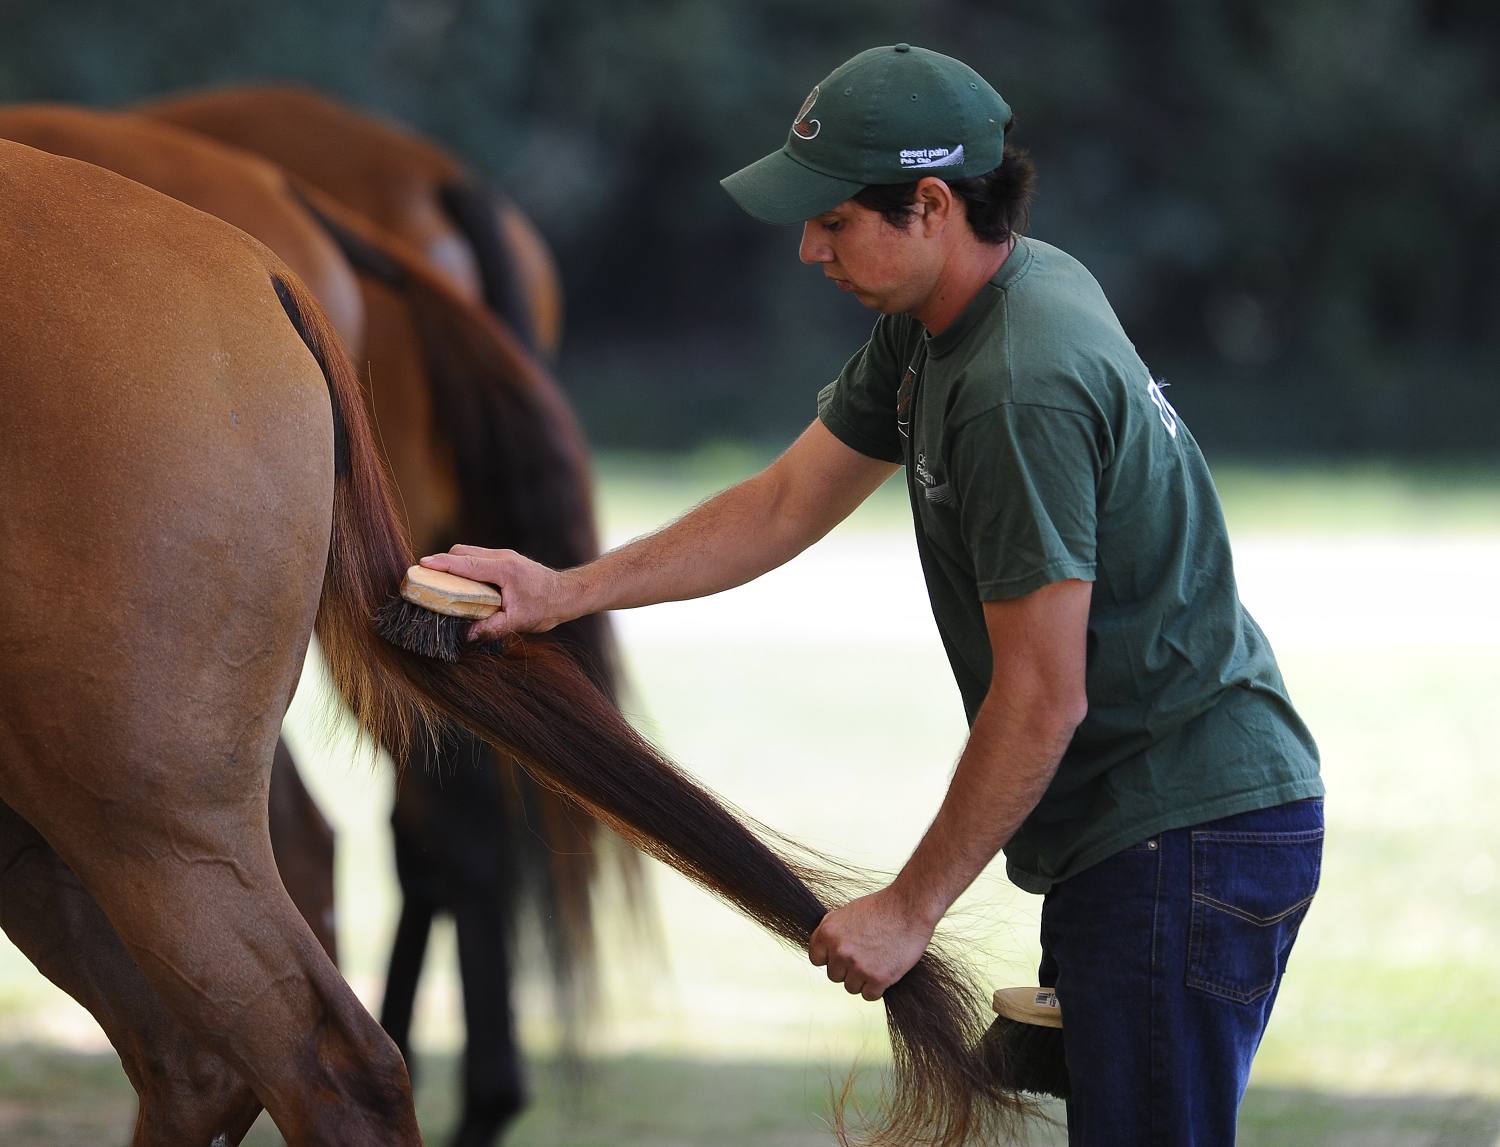 Man grooming horse's tail.